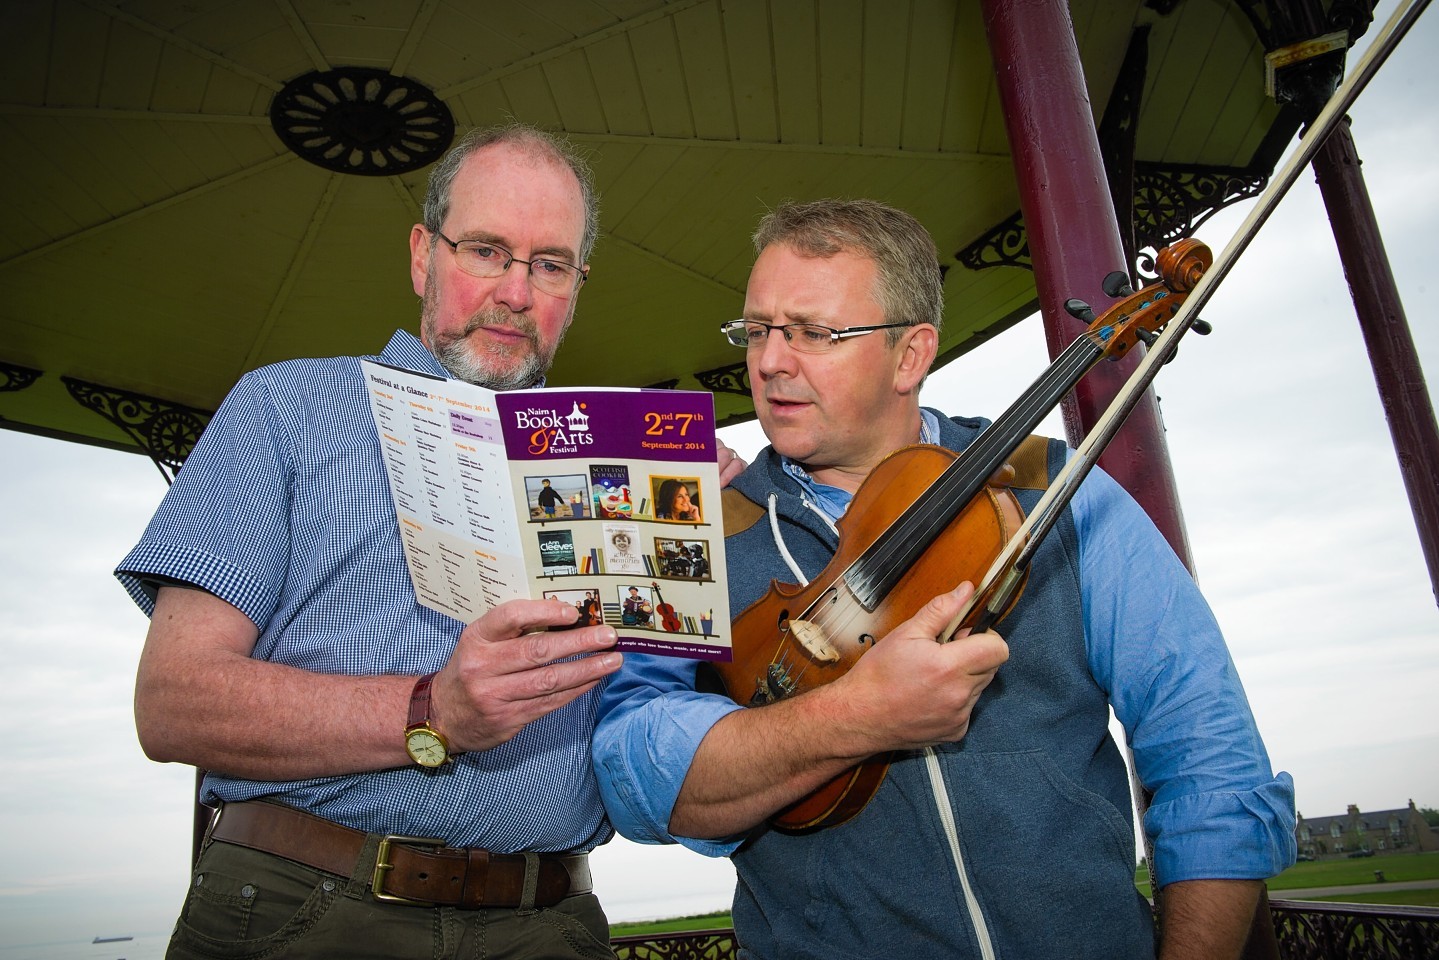 David Godden, Chair of the Nairn Book and Arts Festival,  and BBC Radio Scotland's Bruce MacGregor